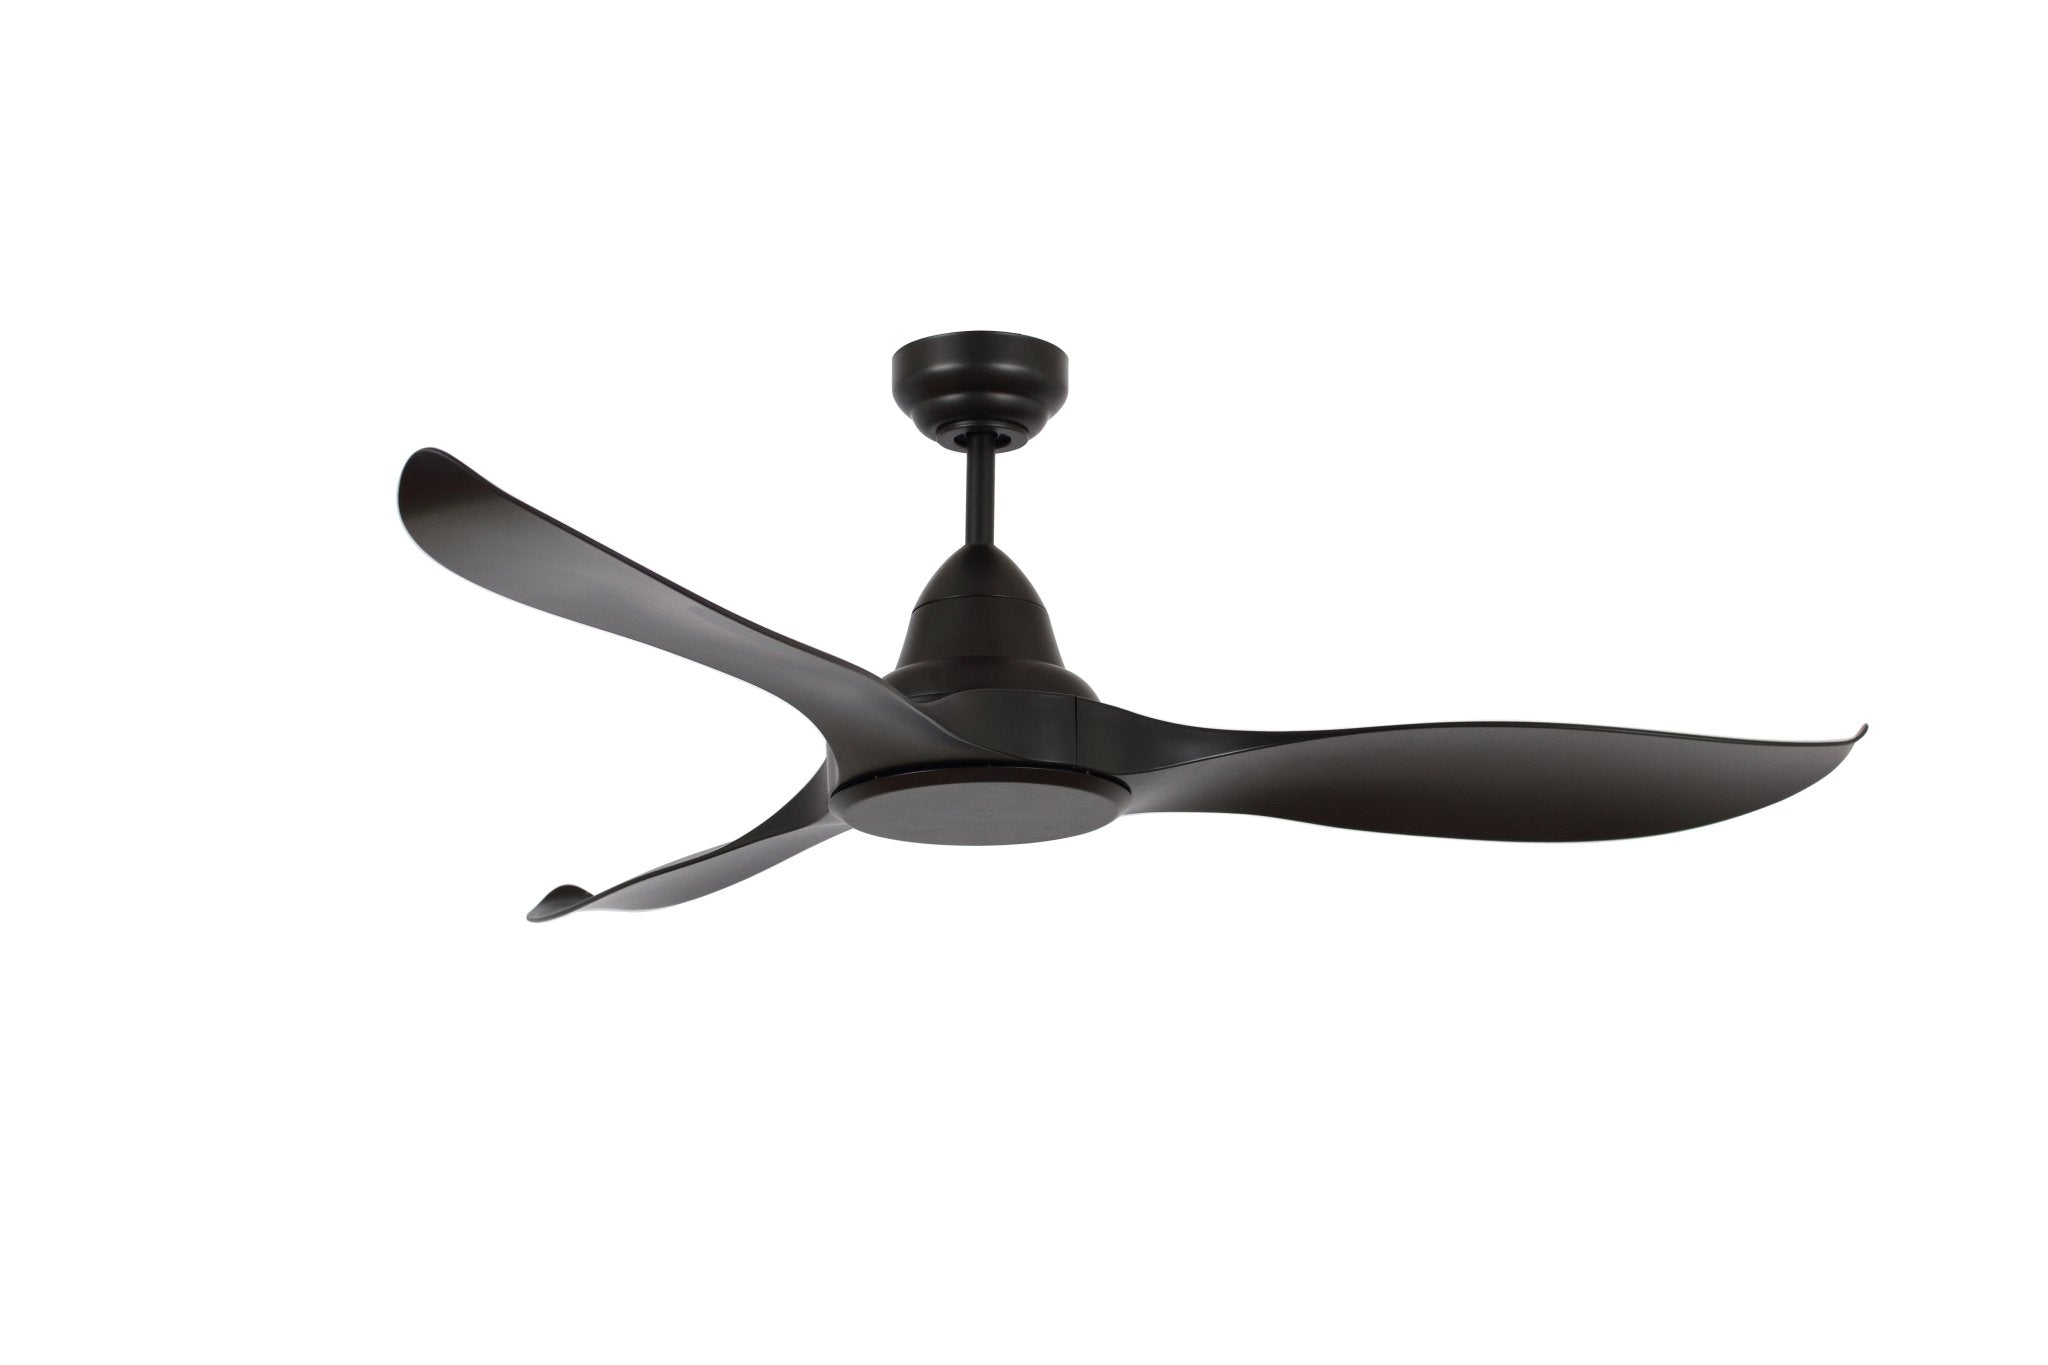 52" (1320mm) Wave DC Ceiling Fan Only With 3 ABS Blade & Remote Control - Mases LightingMartec